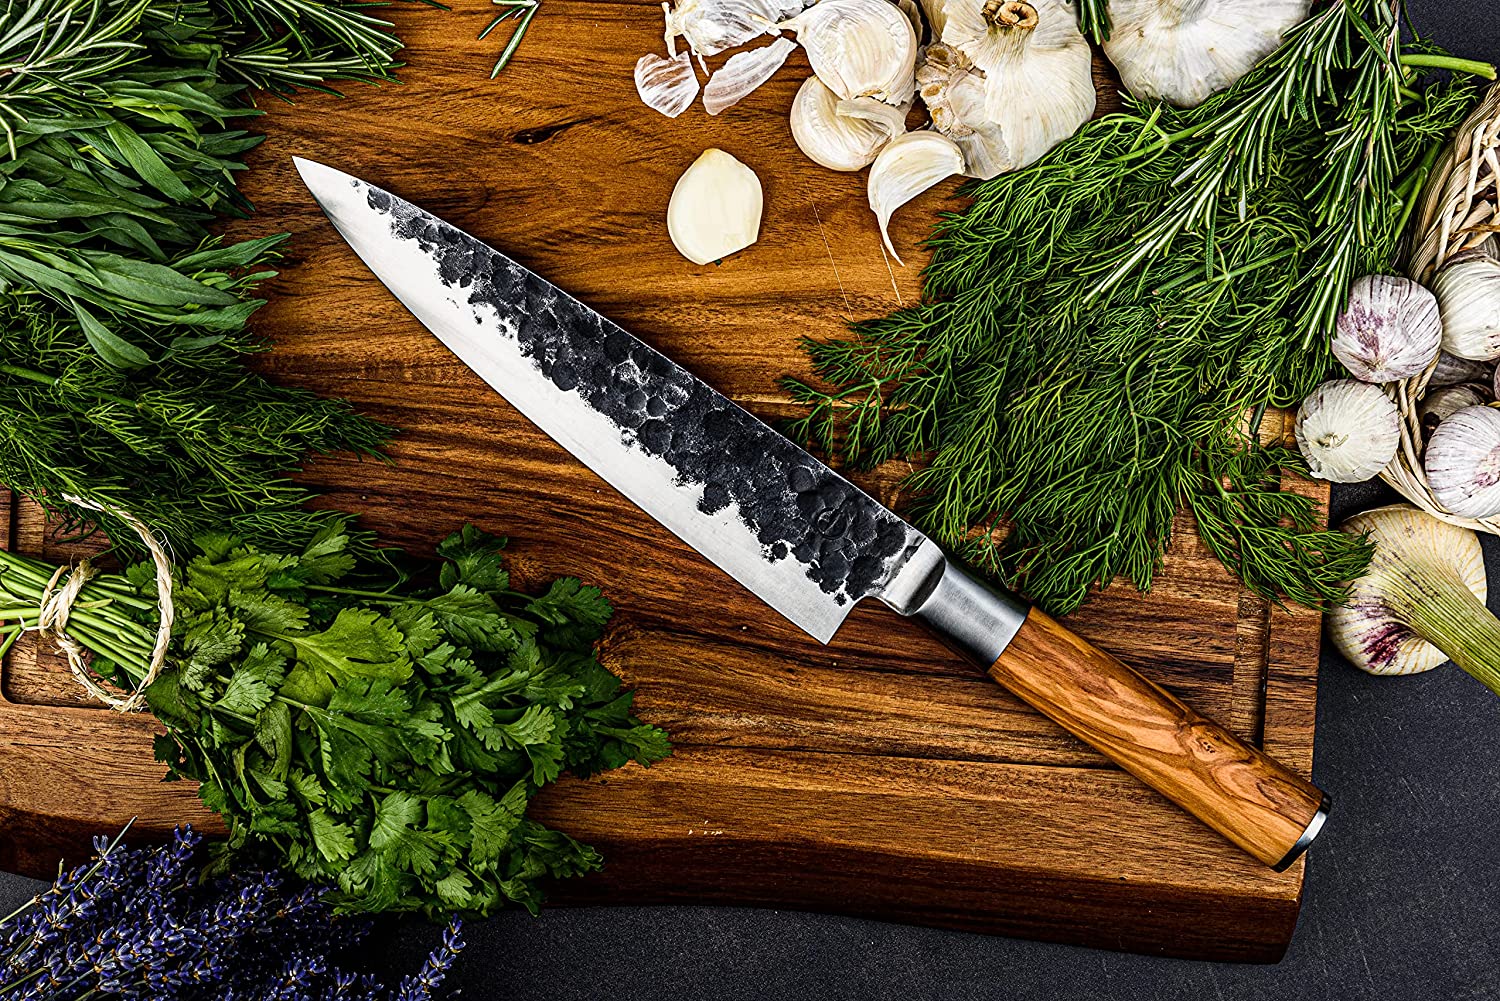 5 Inch Kitchen Knife. Chef's Knife. Handmade Knife. Knife for Cutting  Vegetables and Herbs. Kitchen Tool. Kitchen Cutlery. Forged Knife 